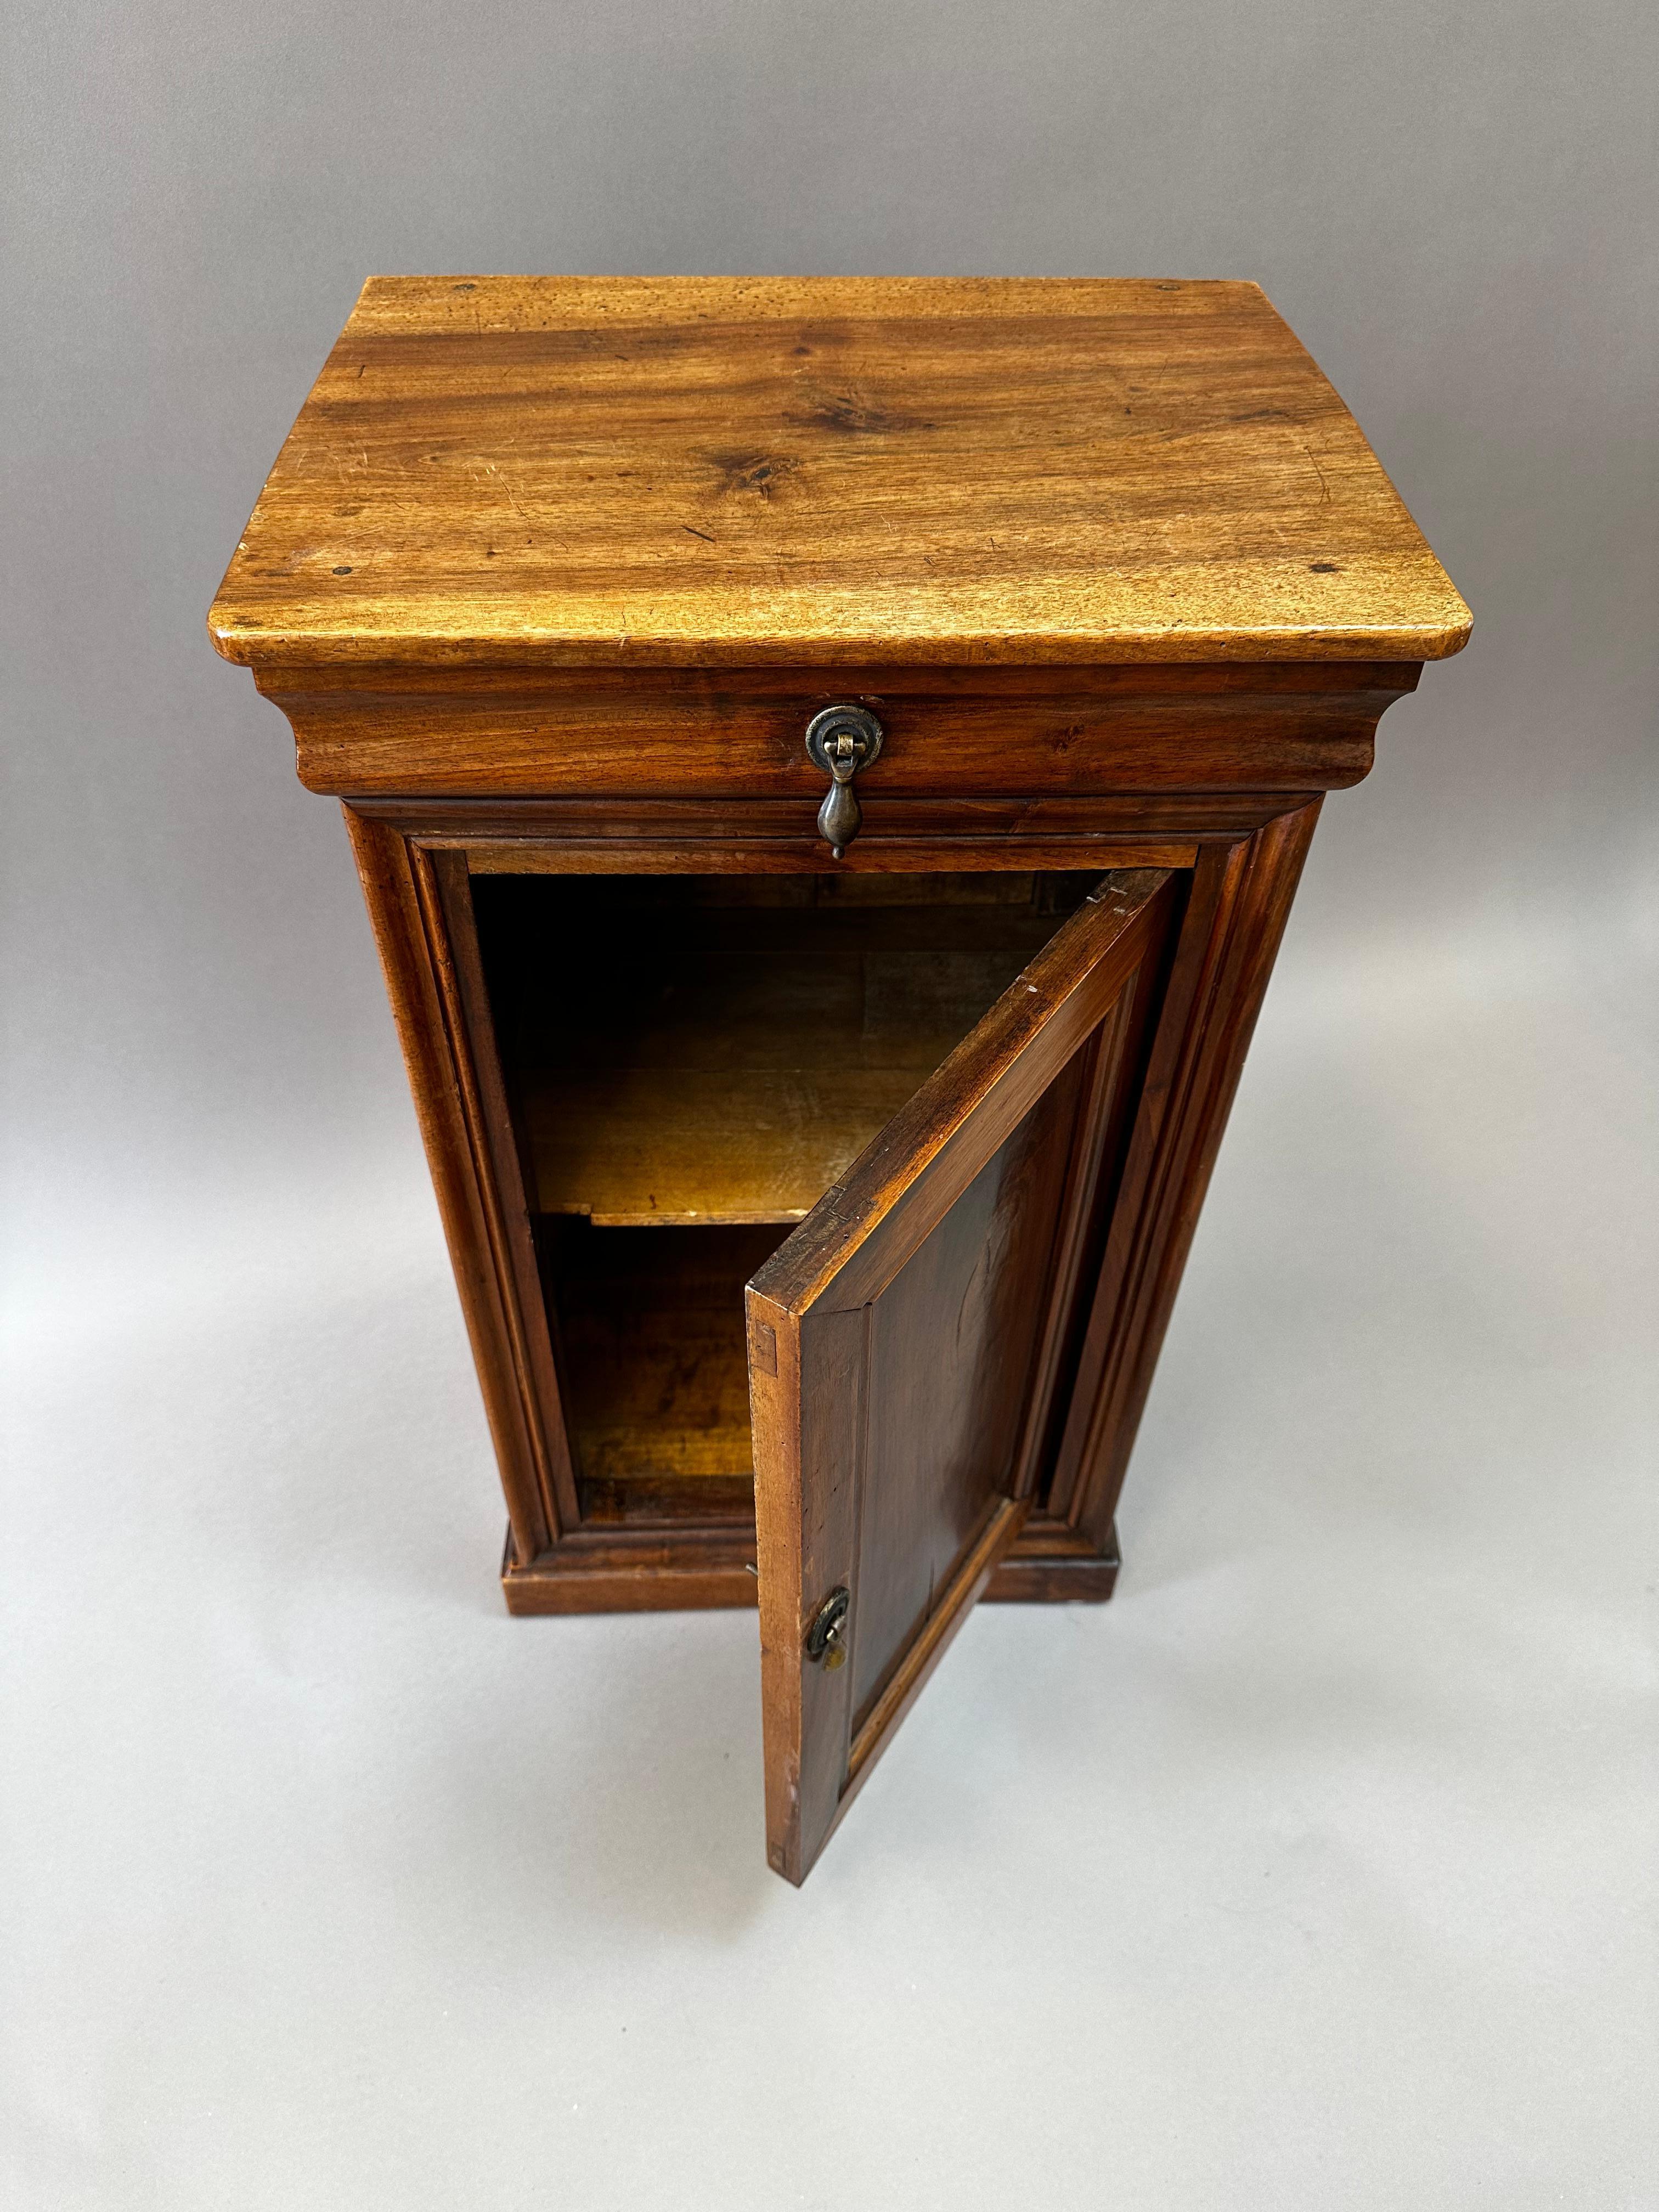 Early 19th Century French Provincial Night Stand. Made of Highly Figured  Circassian Walnut with a rich color and original patination. Single drawer and cupboard. Made in the Loire Valley circa 1820.